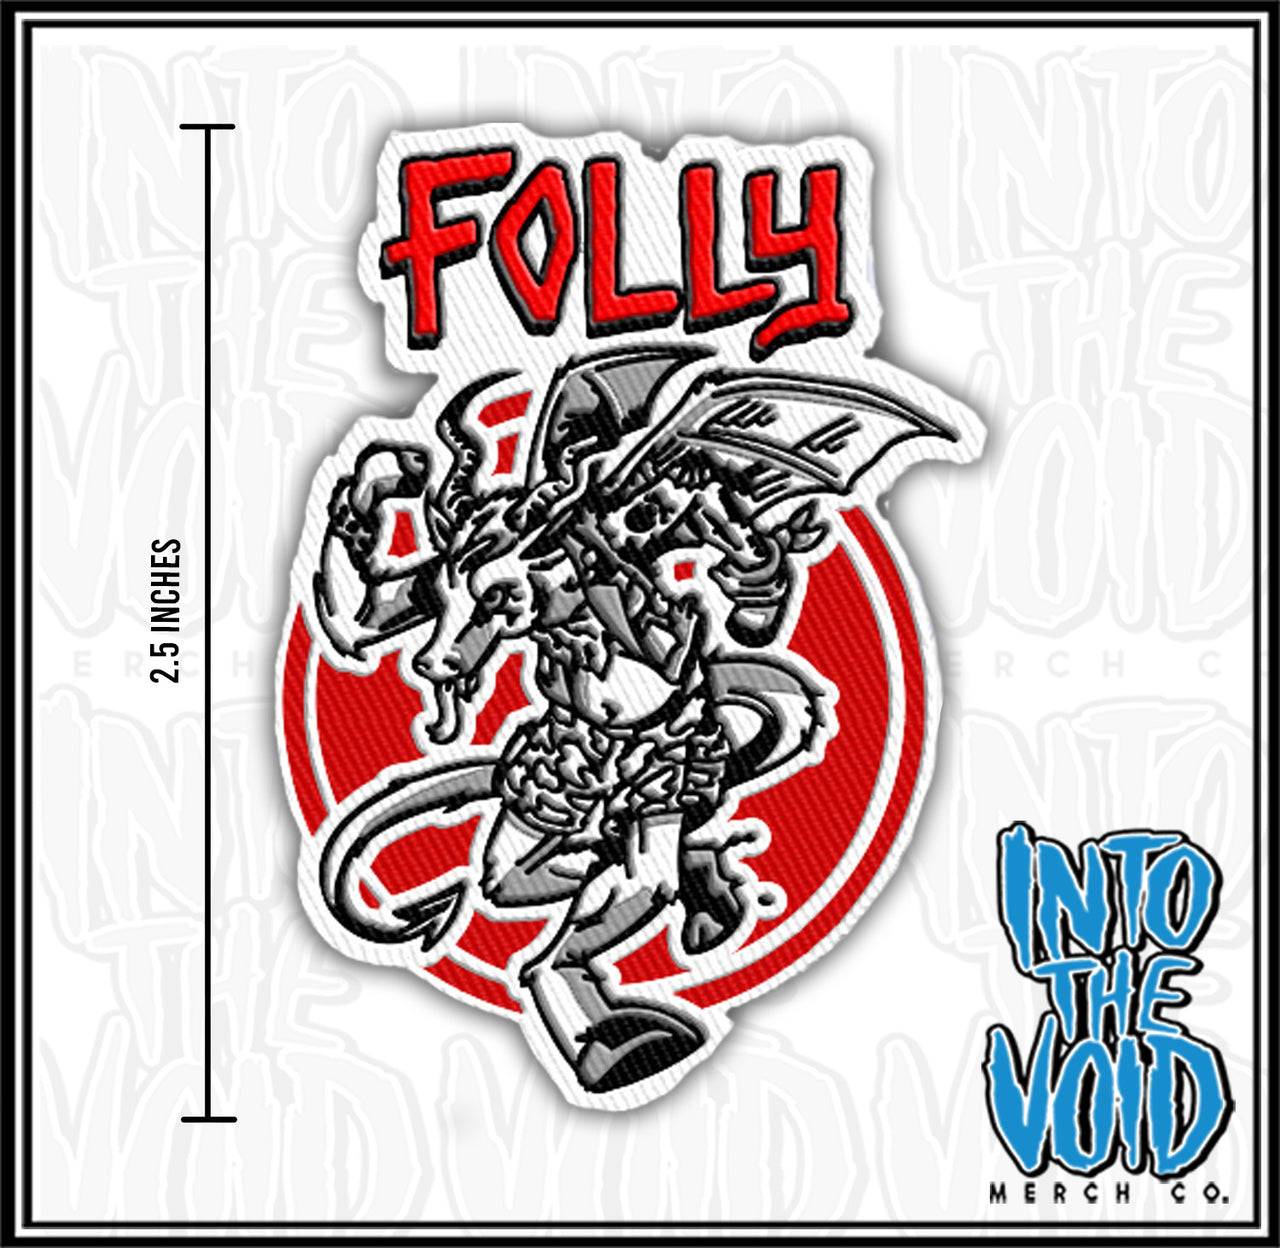 FOLLY - CIRCLE JERKS - Embroidered Patch